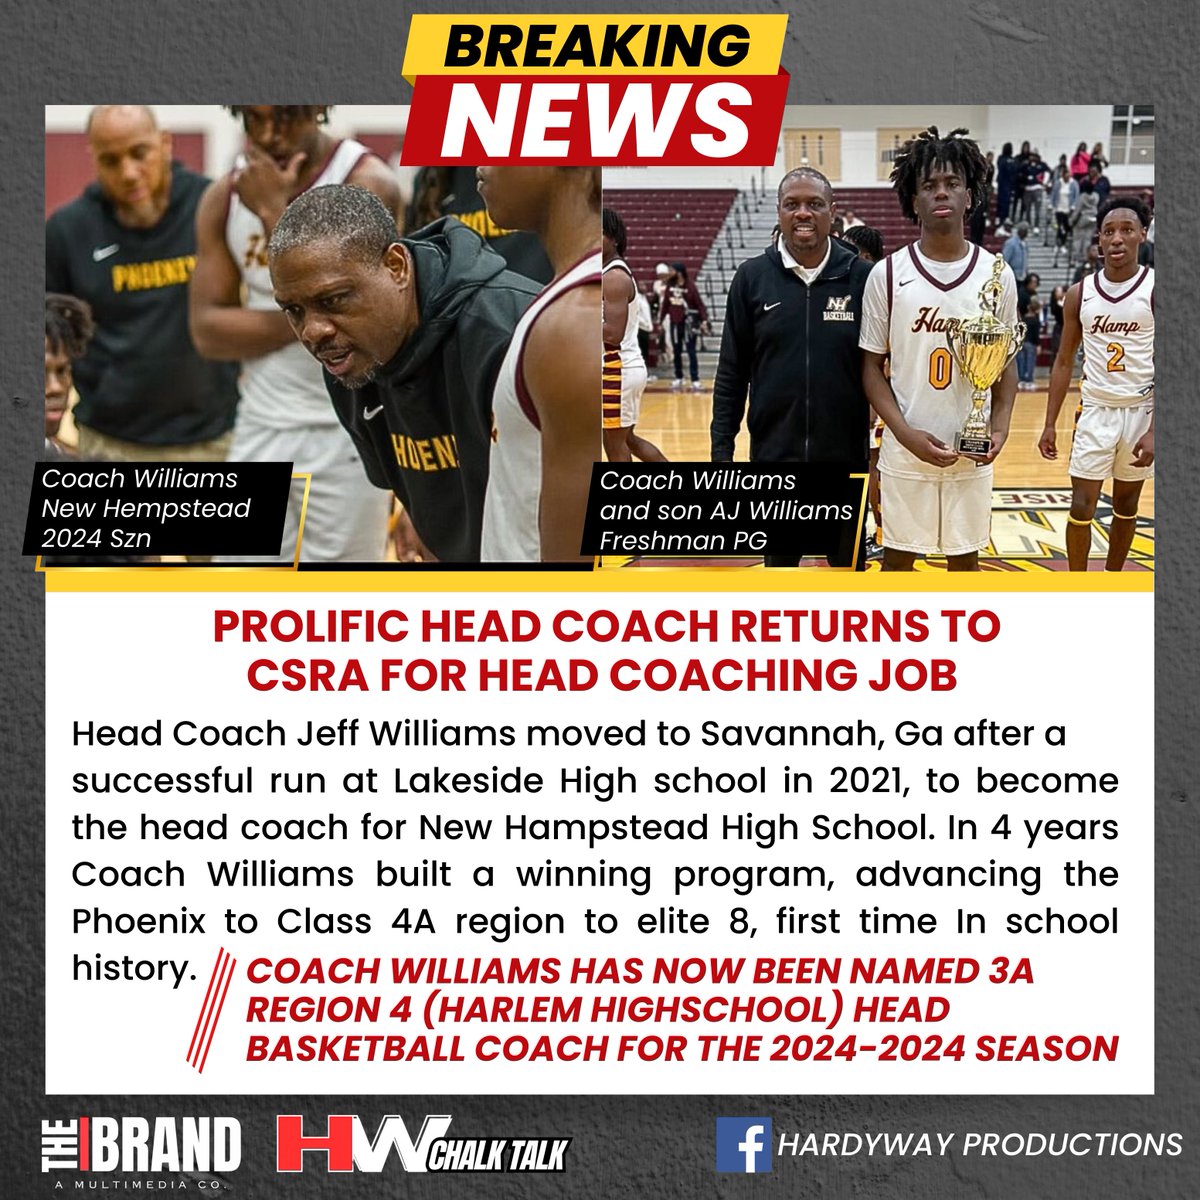 #HWCHALKTALK 📝 Harlem High School just inquired 2 Goats New head coach Jeff Williams and son @AJ_williams0 will both be in the culture this upcoming Basketball Szn 😳😳😳😳 Football & Basketball Harlem Looking real good right now 👀 #HEARITHEREFIRST @PowerRiseFamily